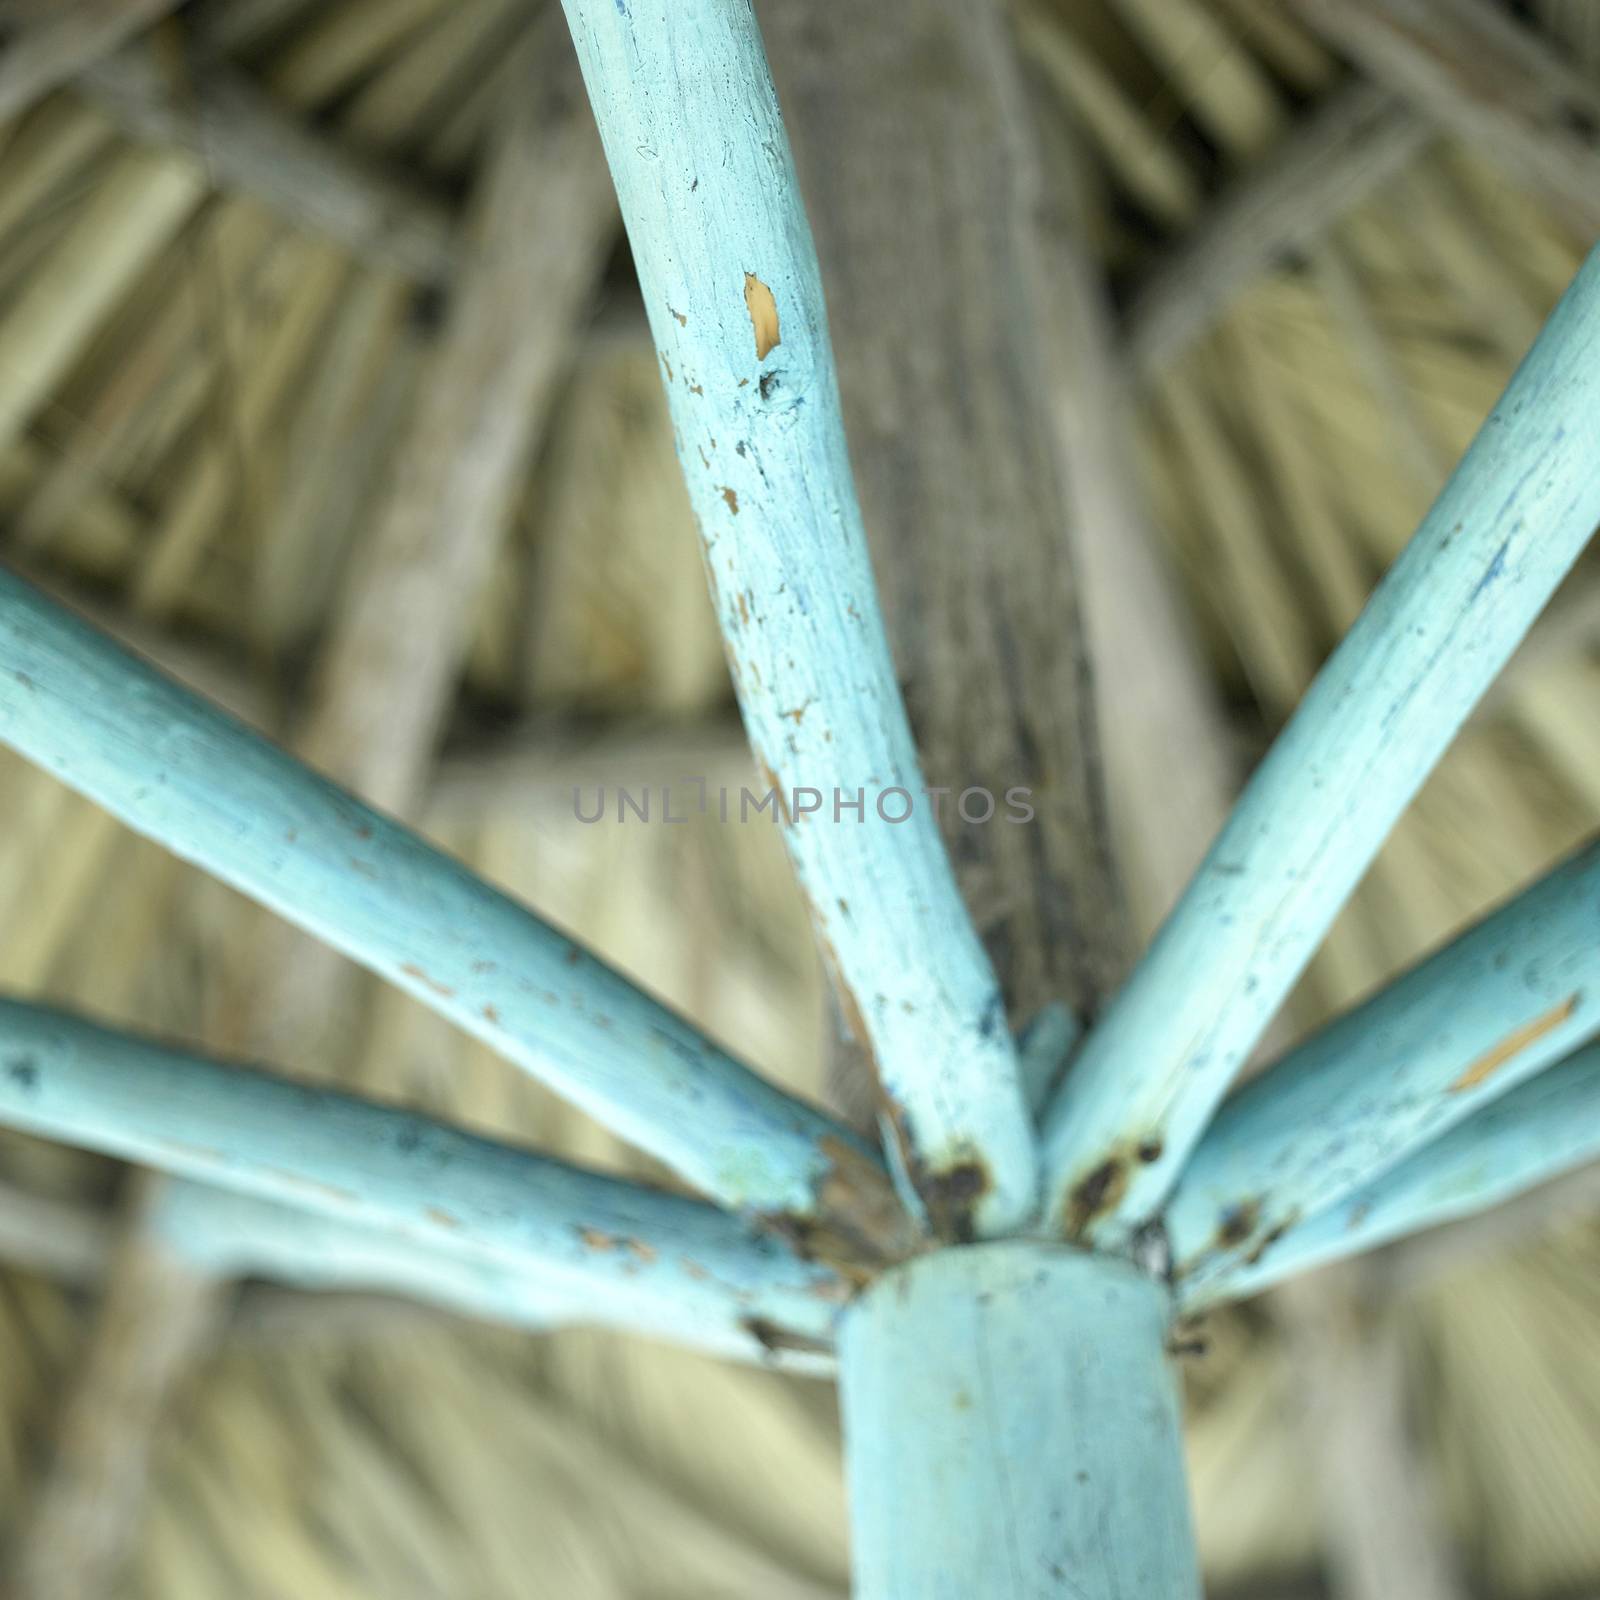 Being under a palapa